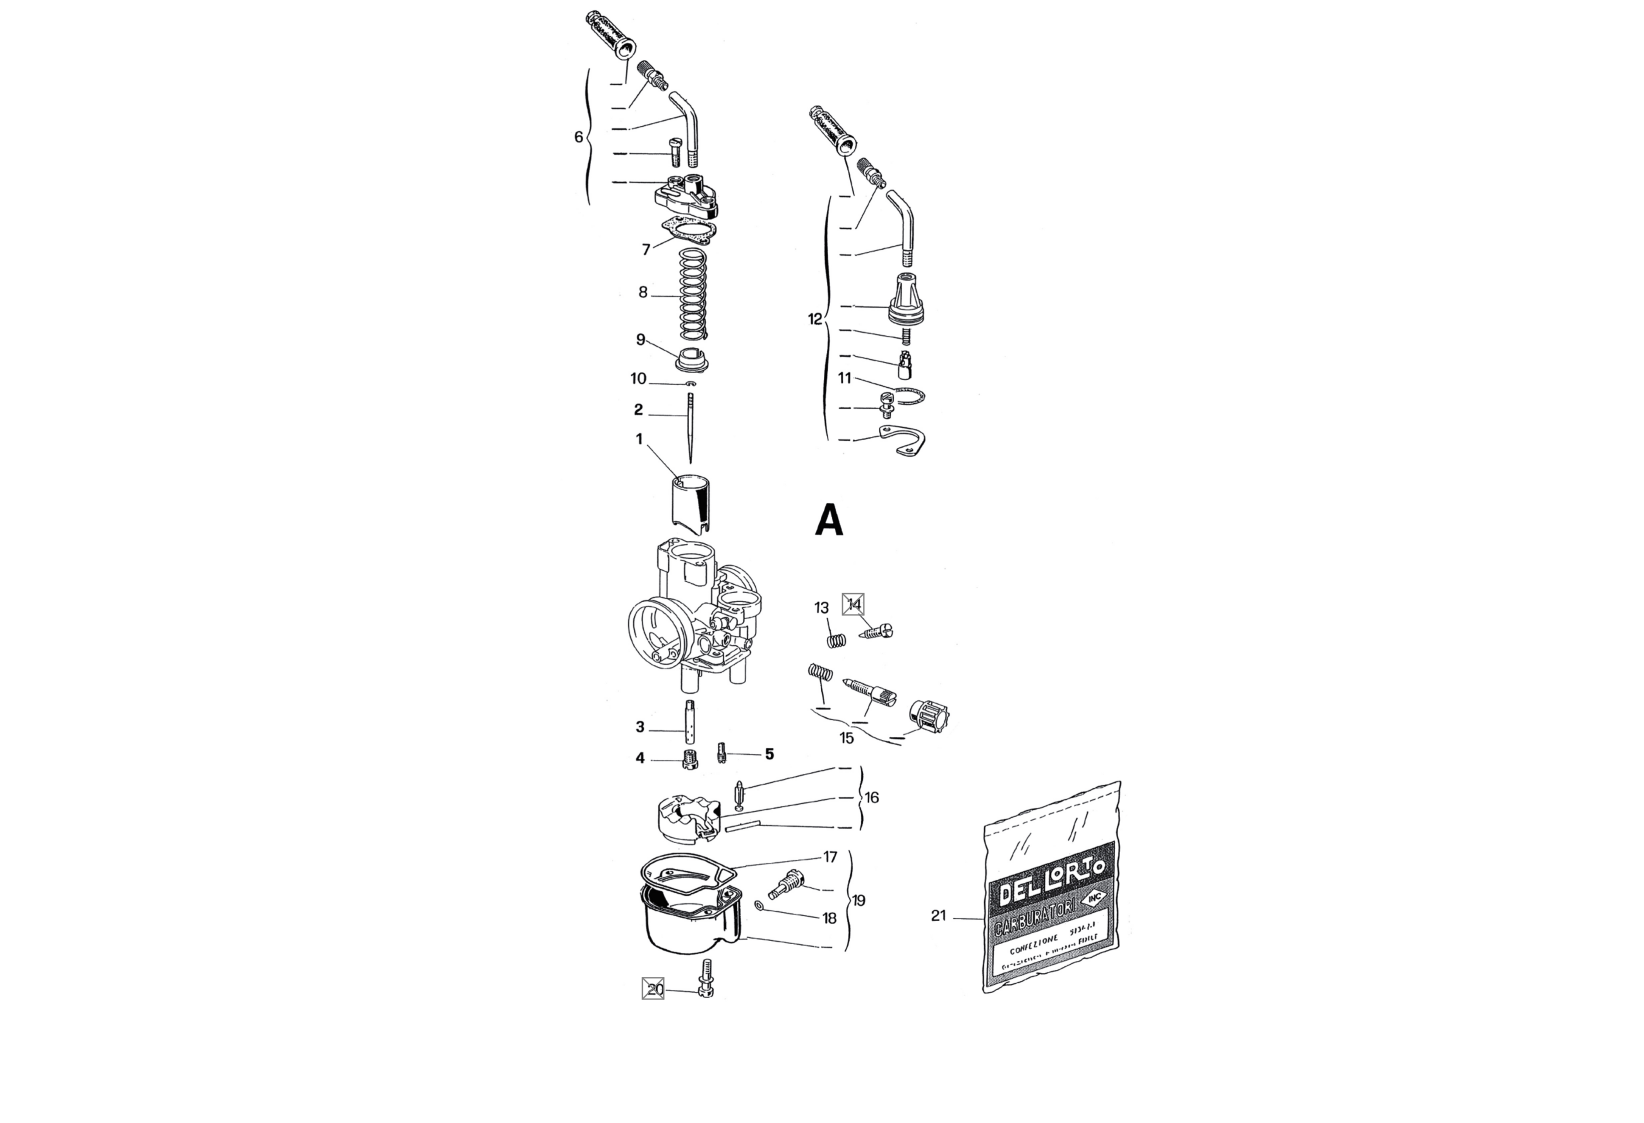 Exploded view Carburateuronderdelen Dell'orto PHVB 19 DD (Cod. 1179)